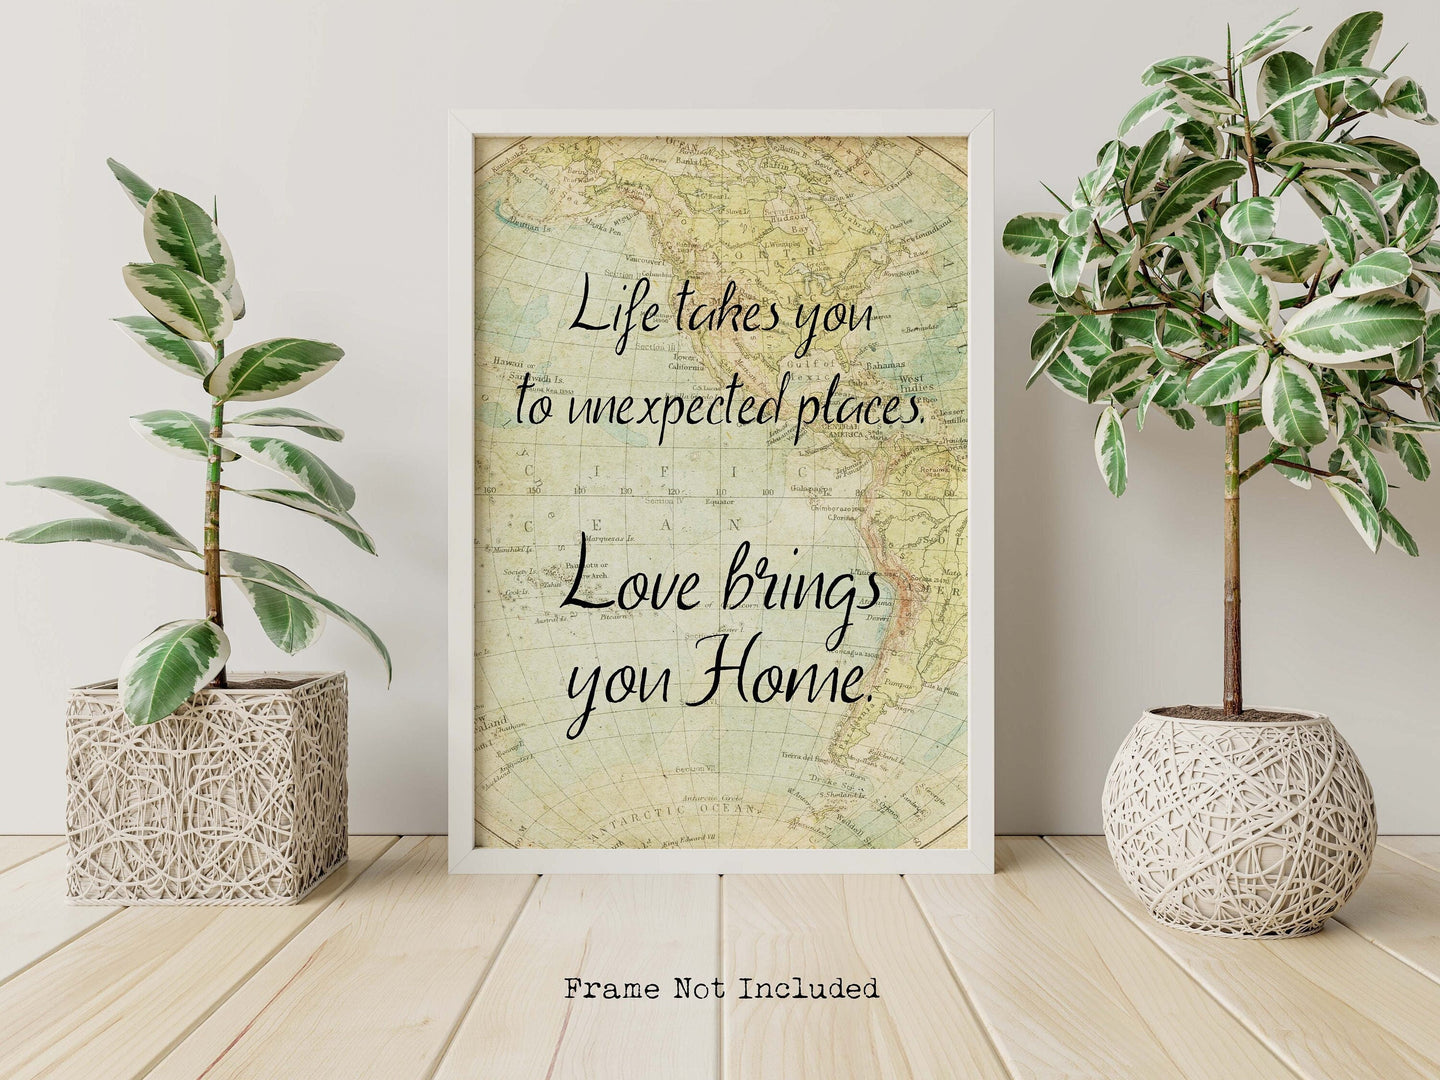 Life takes you to unexpected places. Love brings you home. Vintage Map dorm decor Art Print Home Decor poetry wall art travel sign UNFRAMED